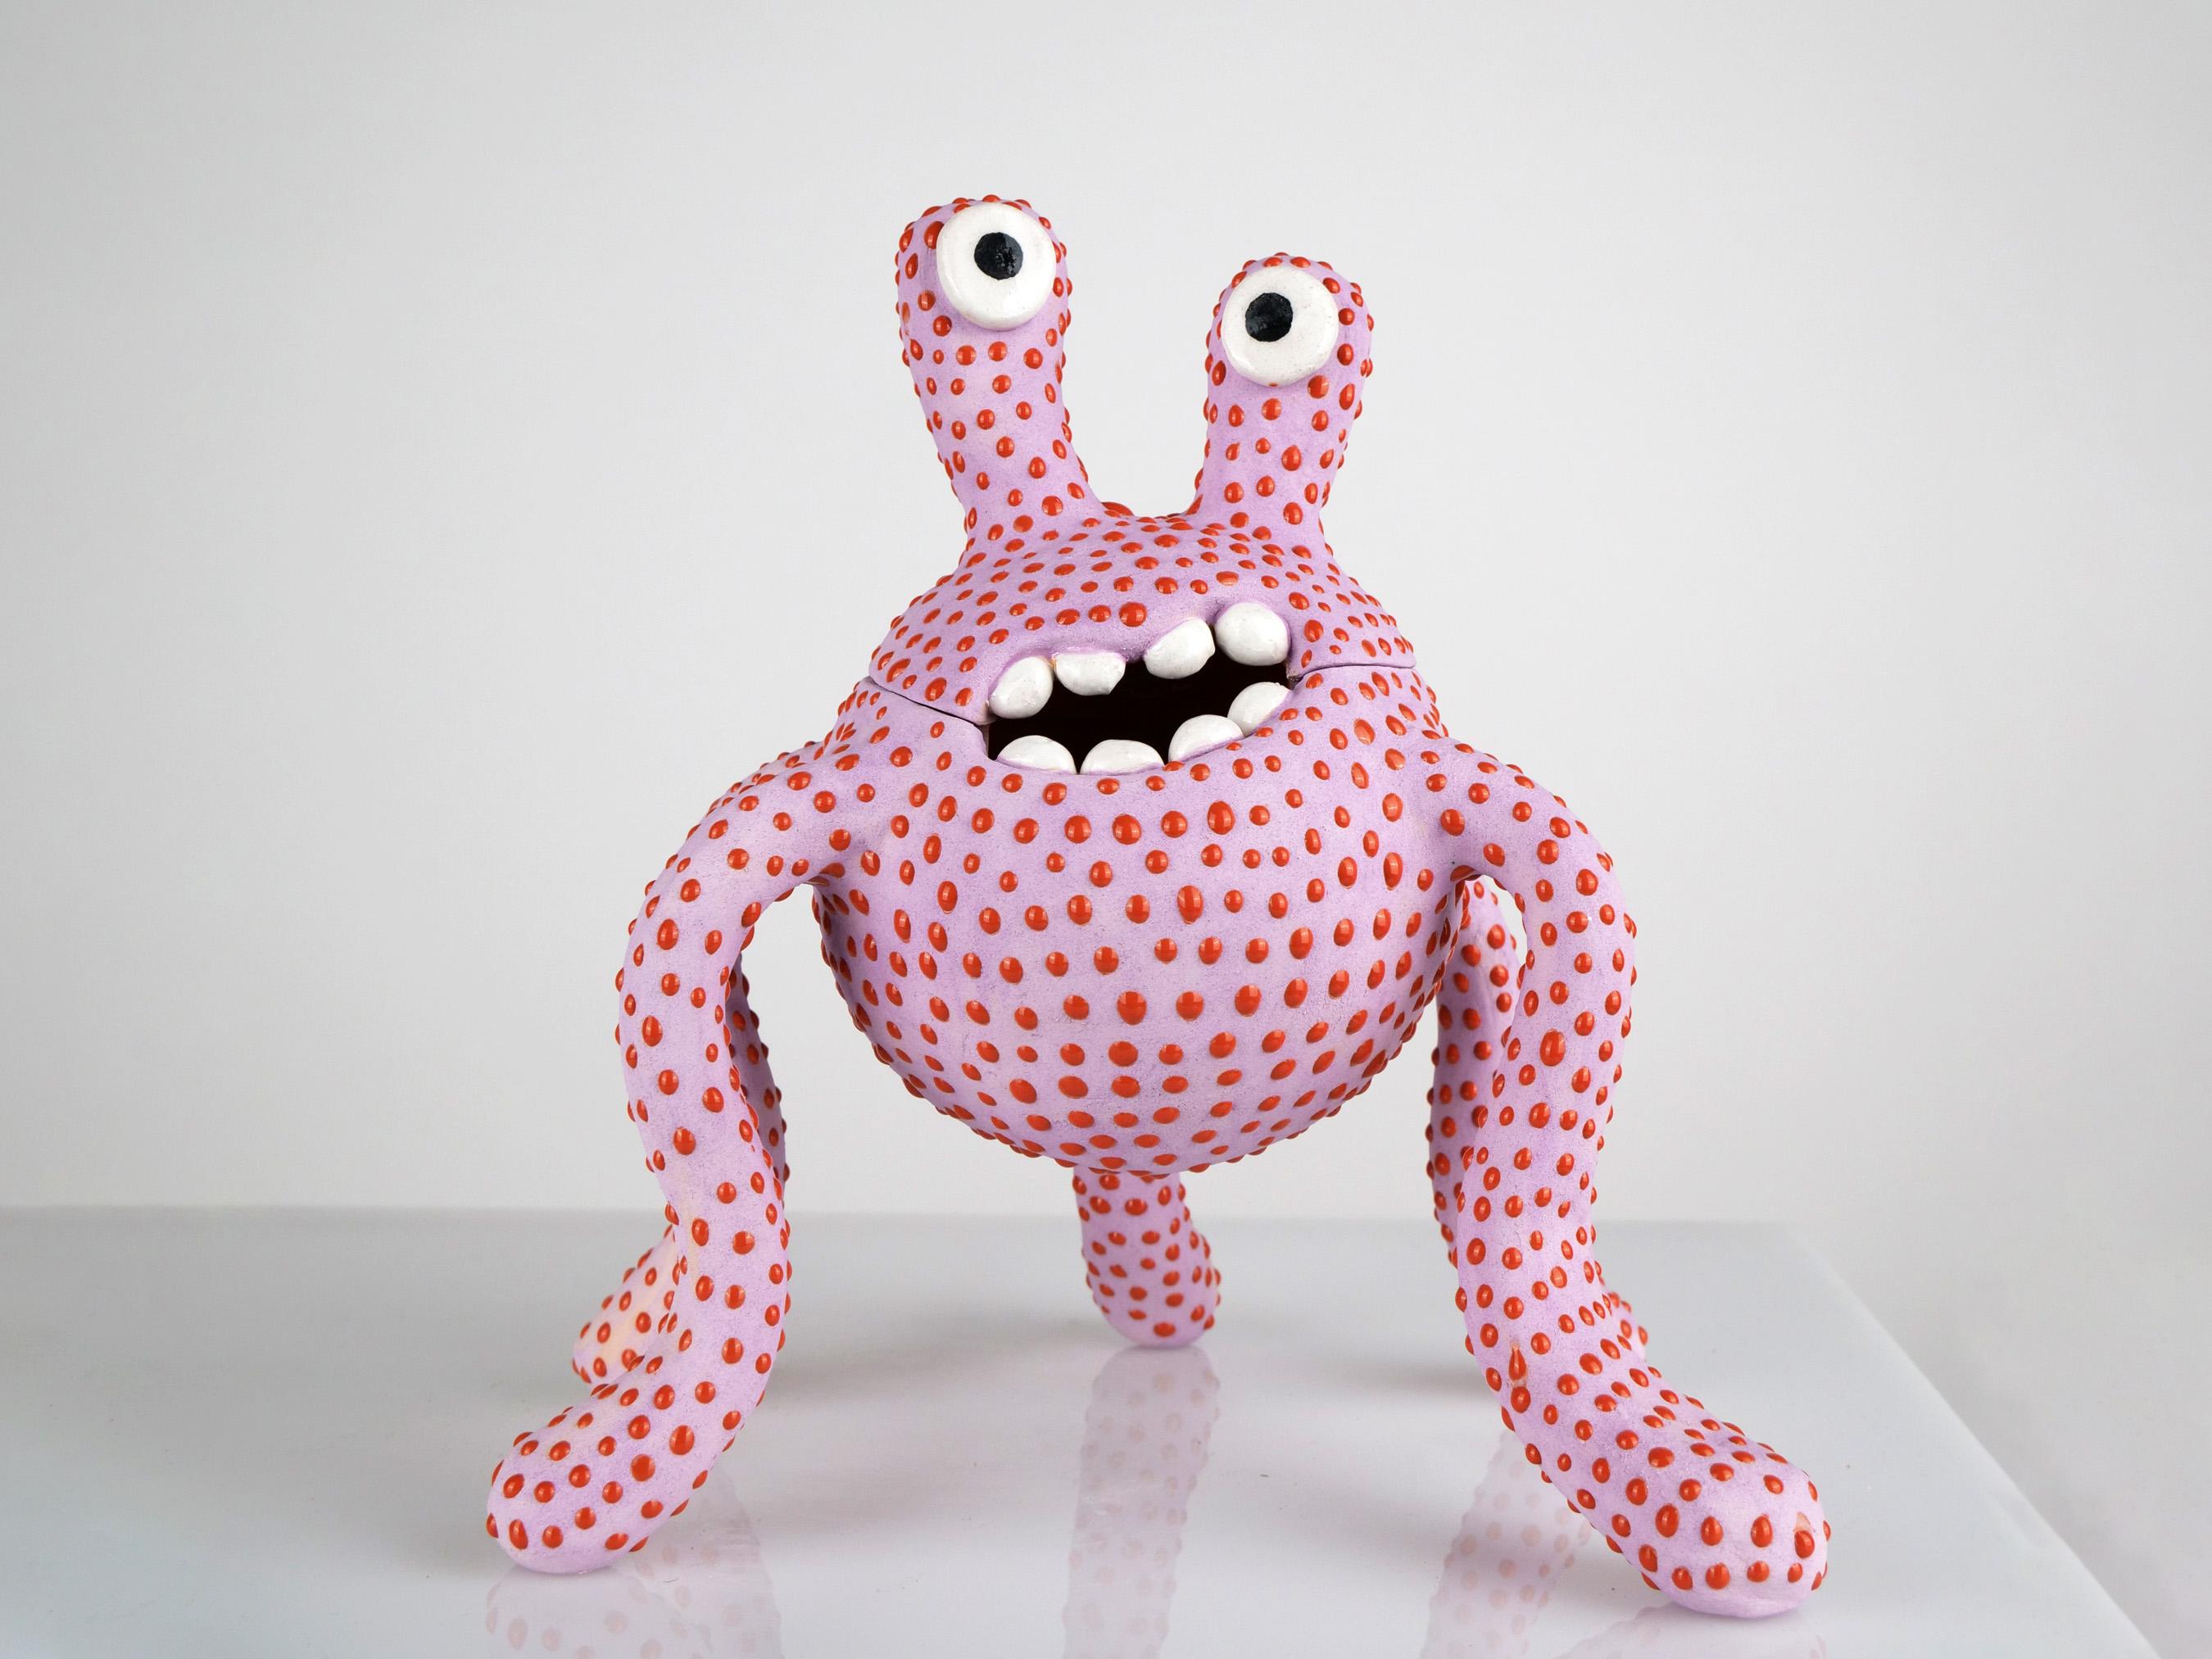 Matte Pink Monster with Glossy Purple Spots and Removable Lid 

Estimated processing time is 4 weeks from order confirmation

Part of the Monster Collection, which arose from a realisation that life can sometimes be too serious. This sculpture